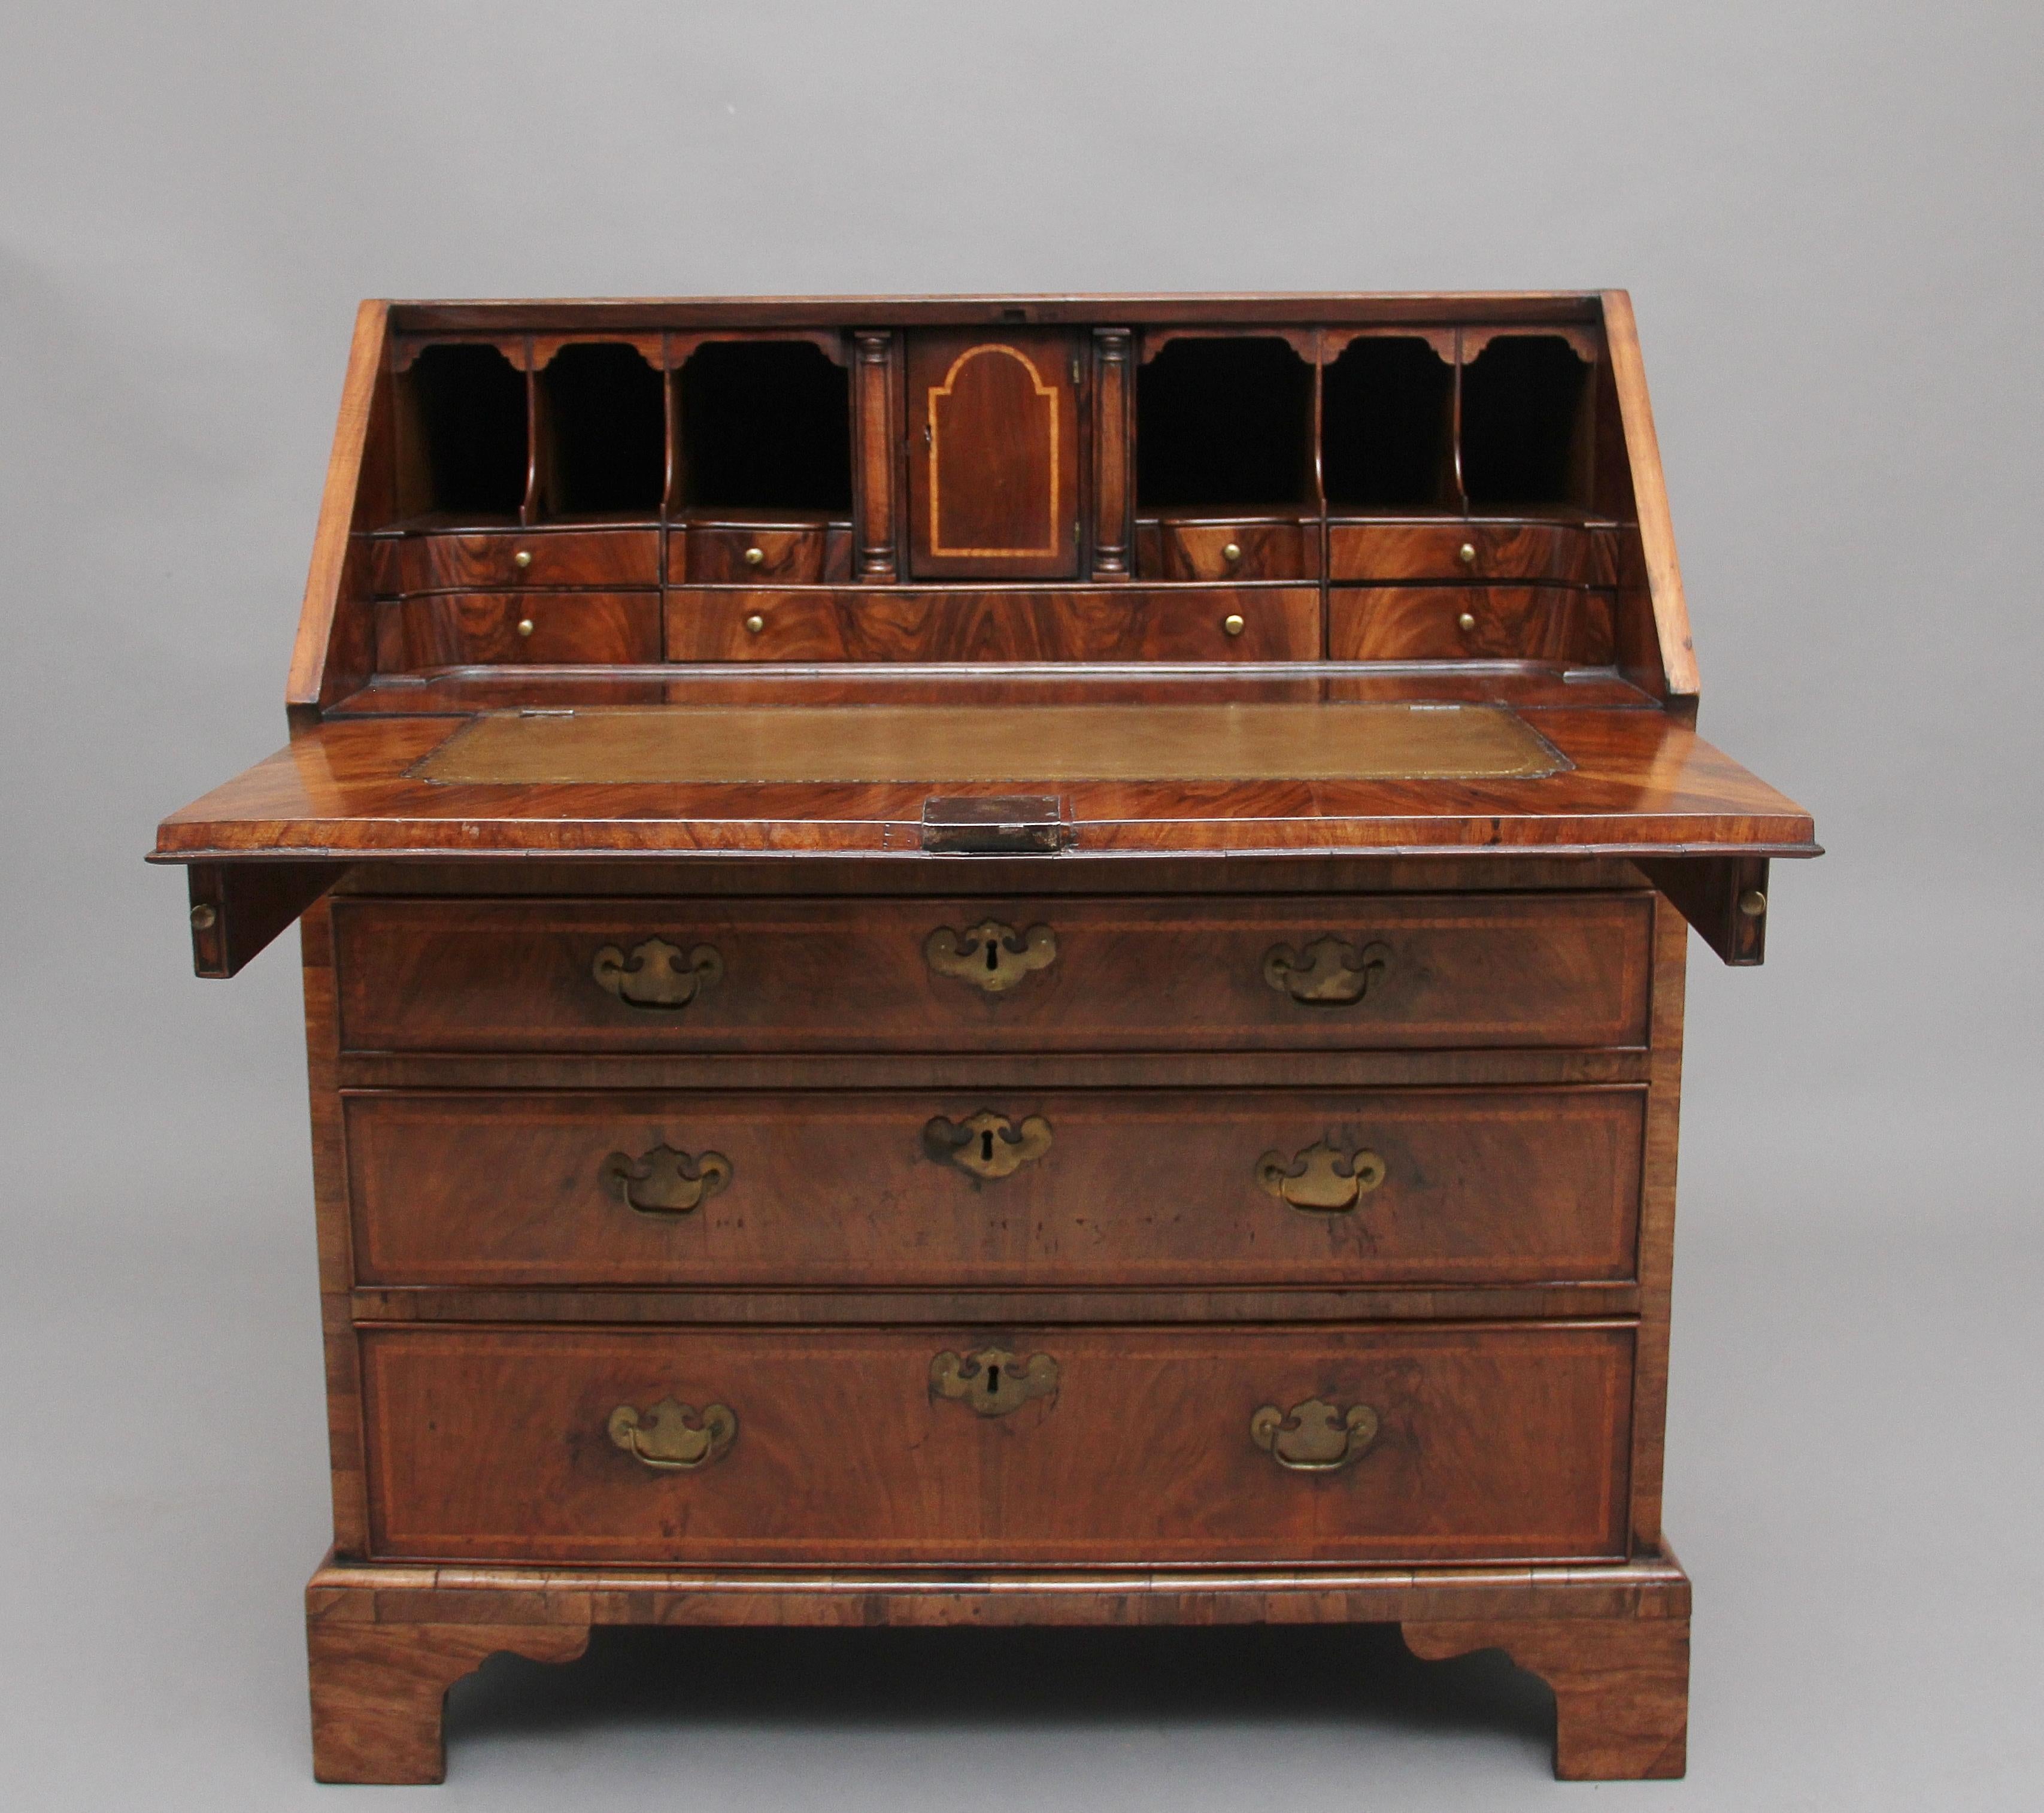 18th century walnut and feather banded bureau, having a lovely figured fall which open to reveal a wonderful fitted interior consisting of various drawers and compartments, including a cupboard door at the centre which opens to include a secret